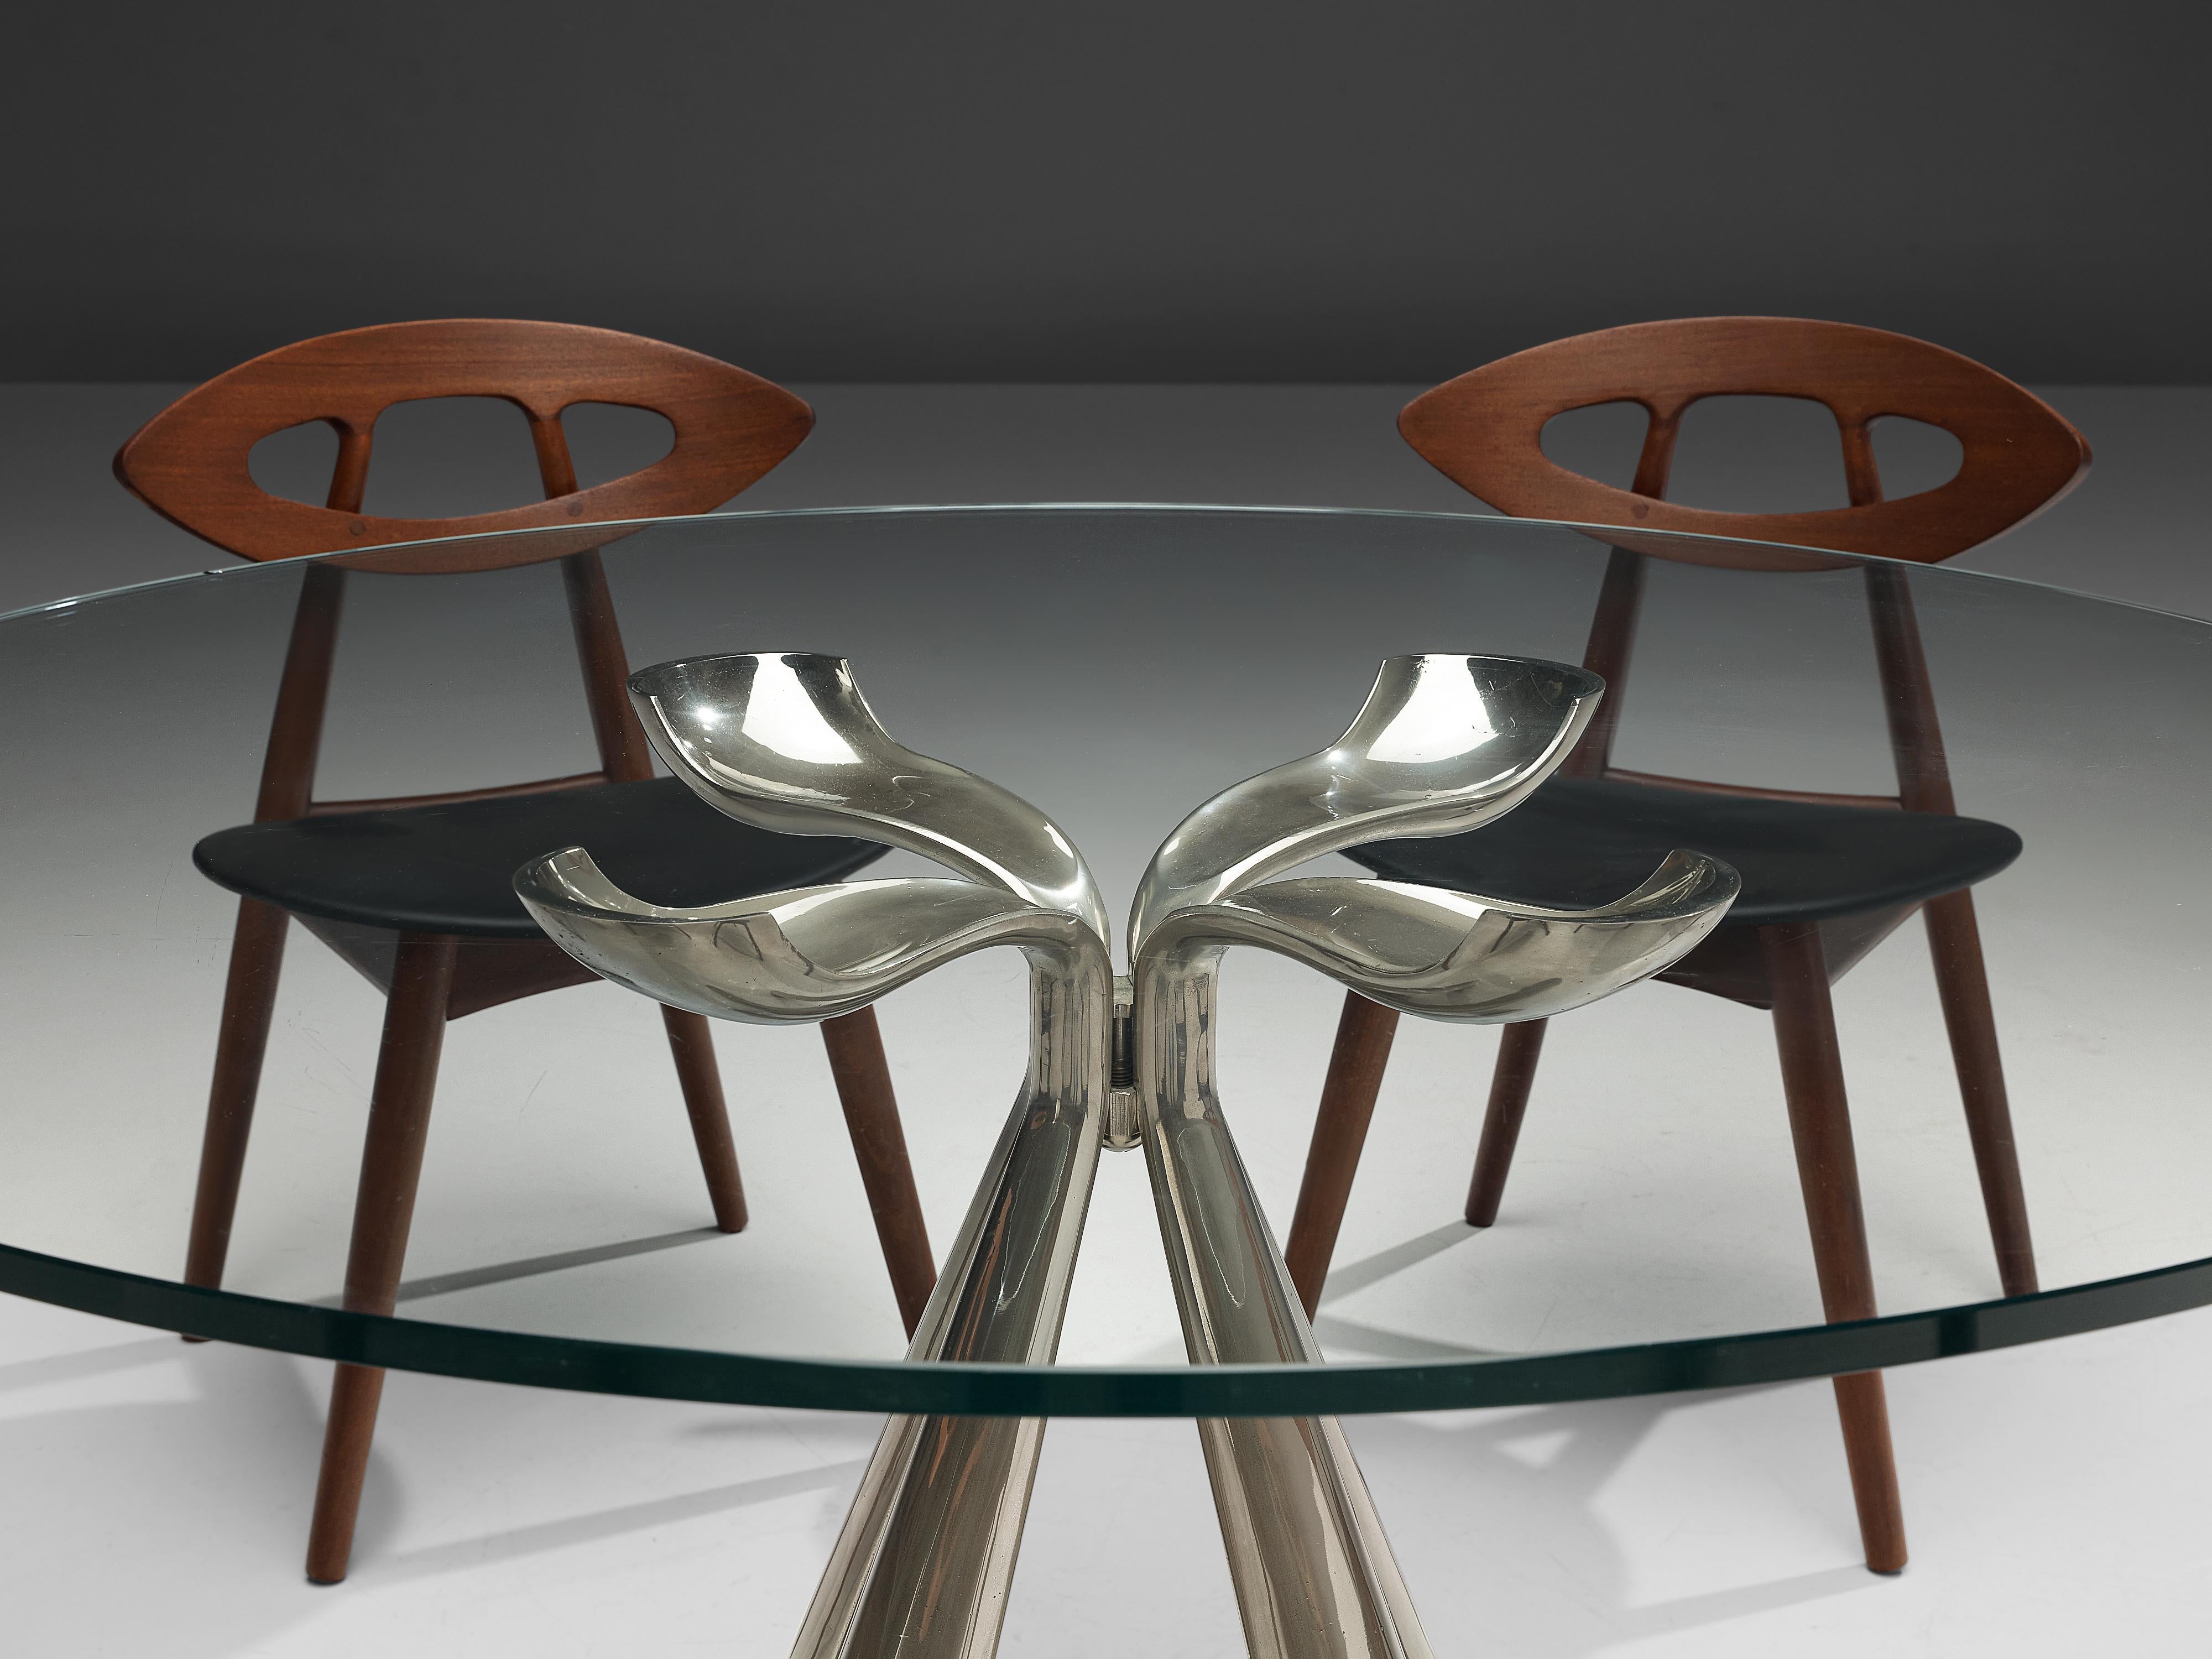 European Vittorio Introini Dining Table and Ejvind A. Johansson 'Eye' Dining Chairs